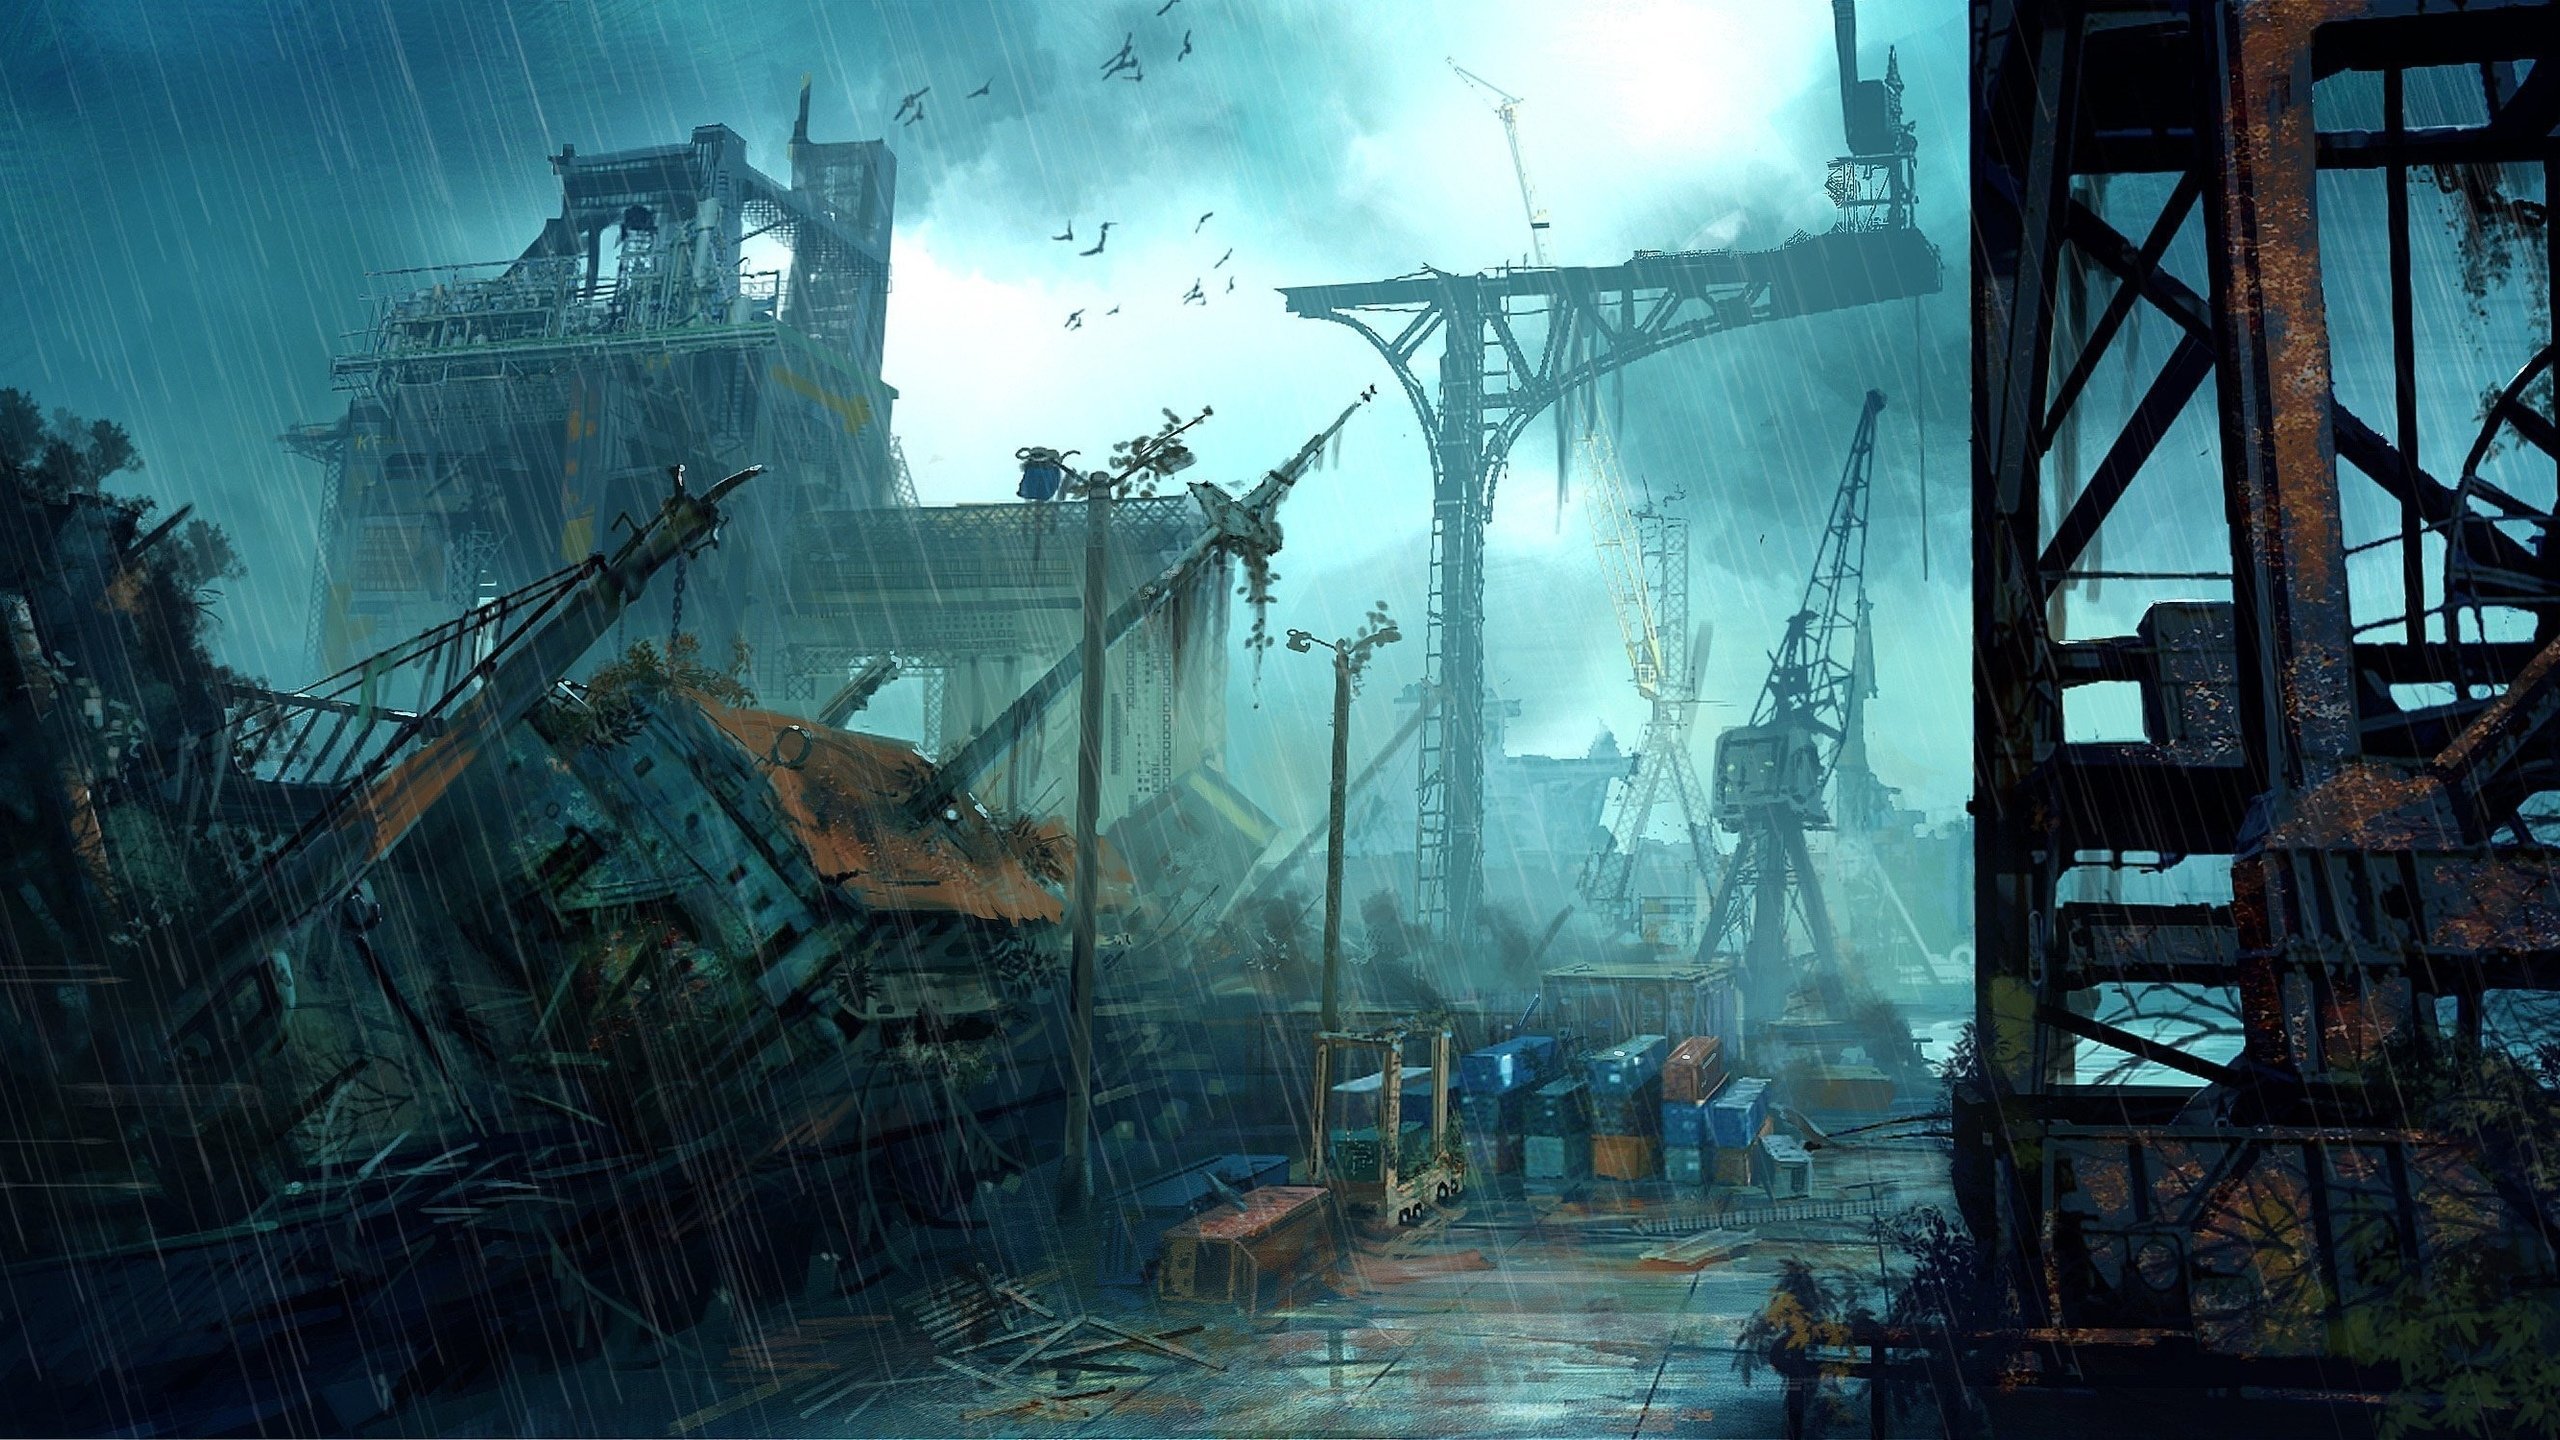 Free Download Post Apocalyptic Wallpaper Id 325274 Hd 2560x1440 For Desktop